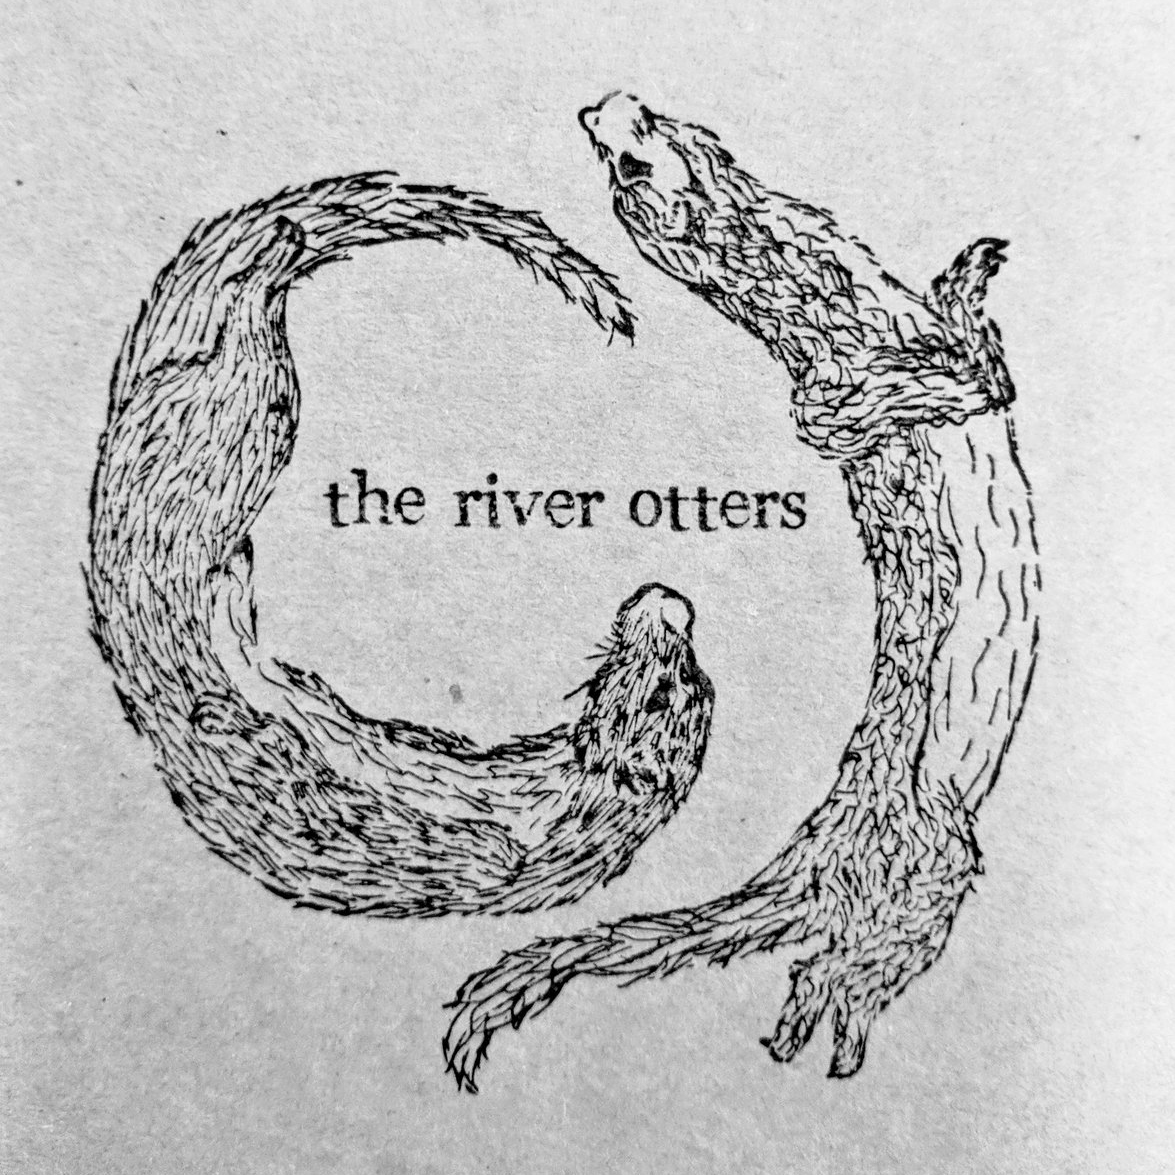 The River Otters